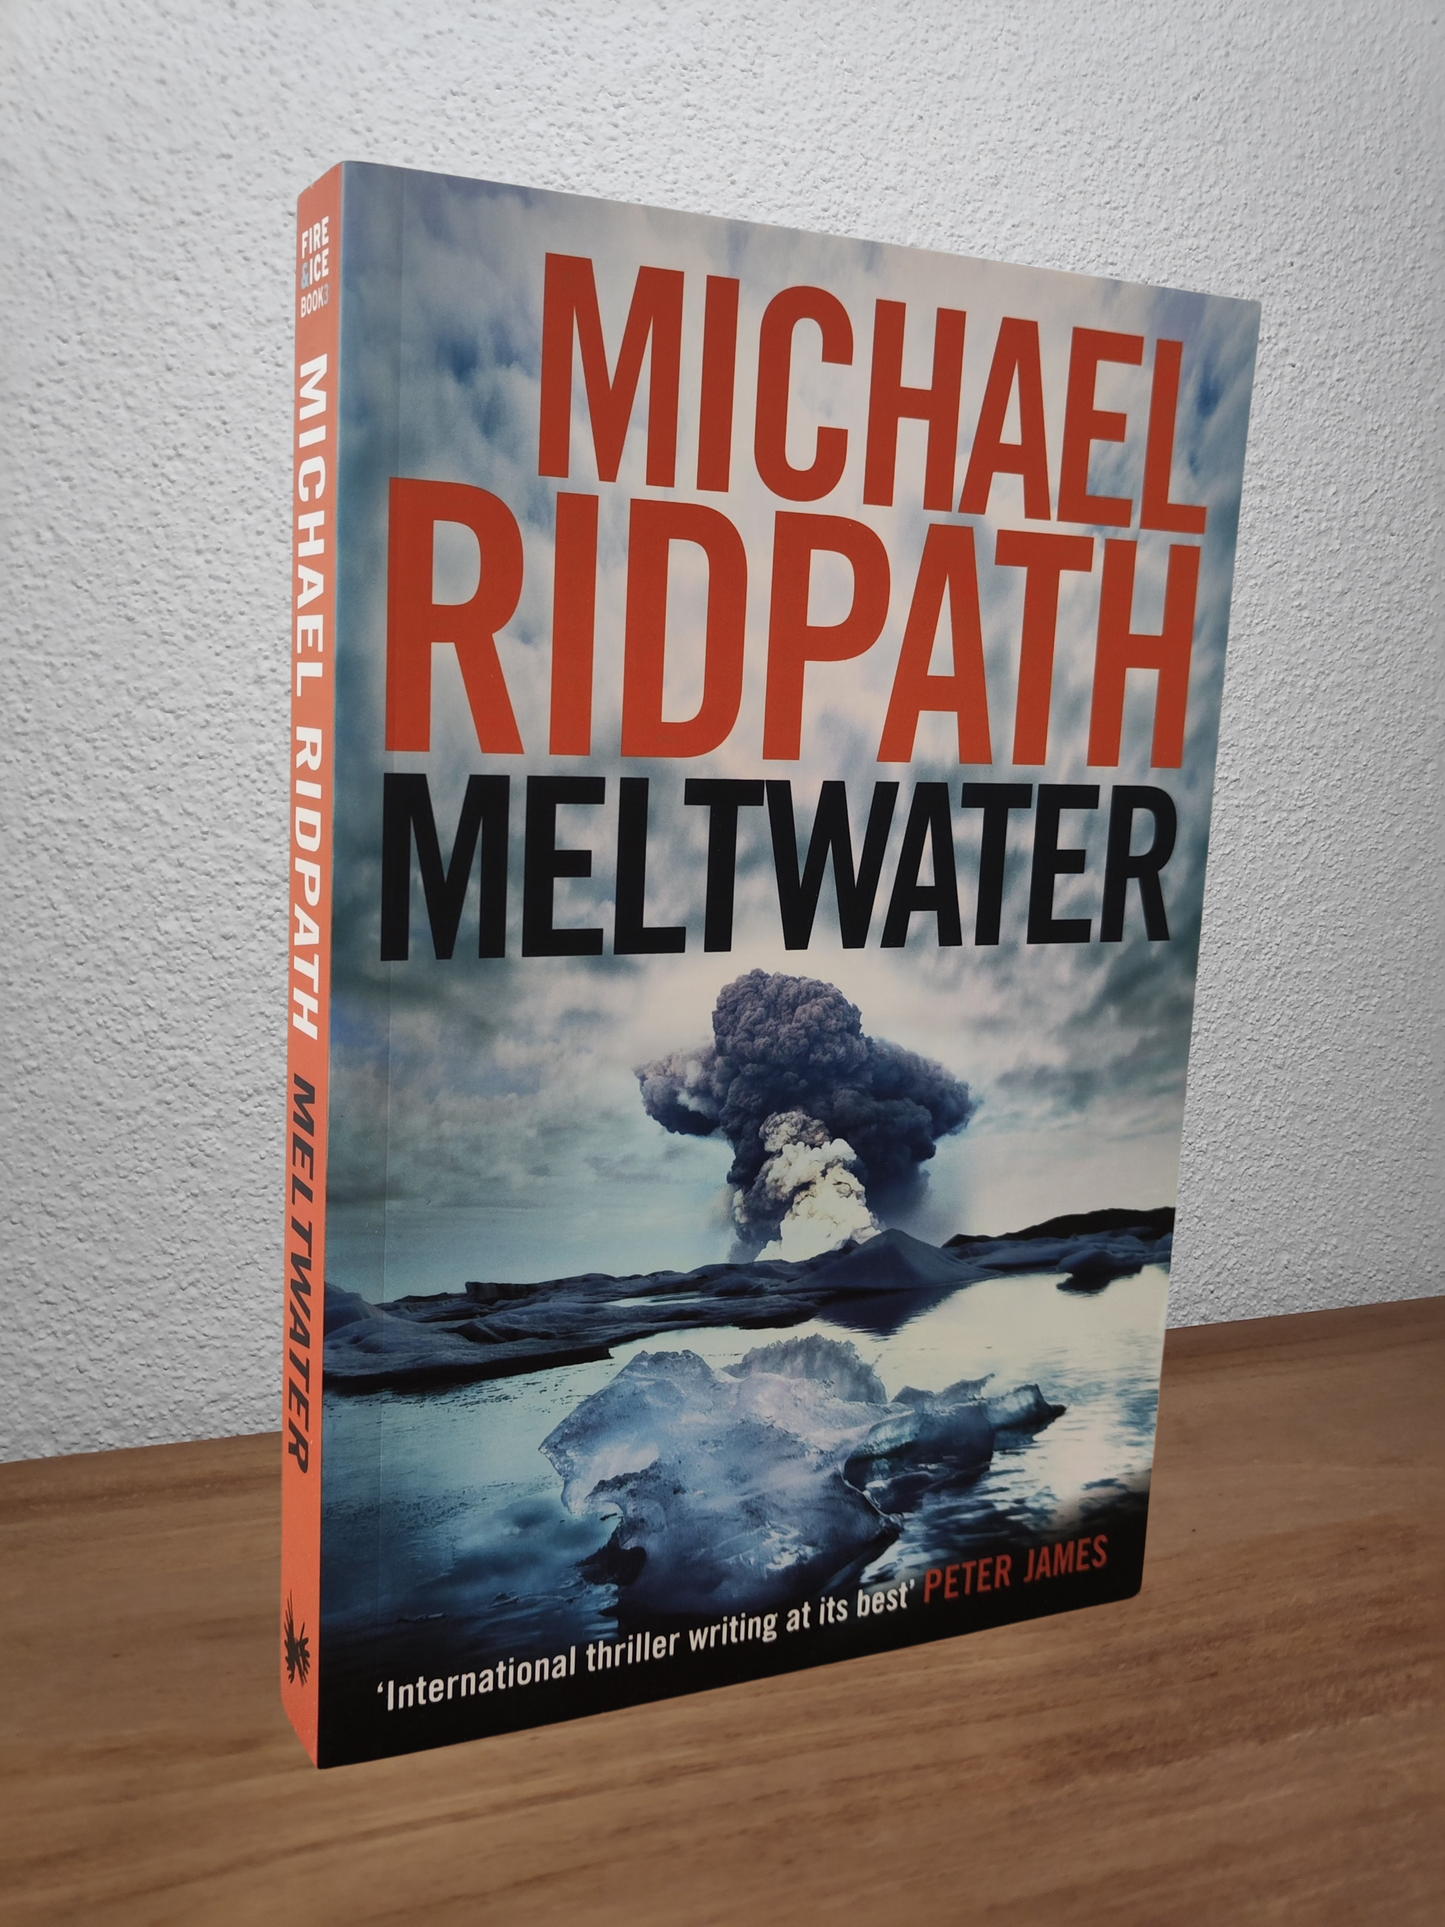 Michael Ridpath - Meltwater (Fire and Ice #3)